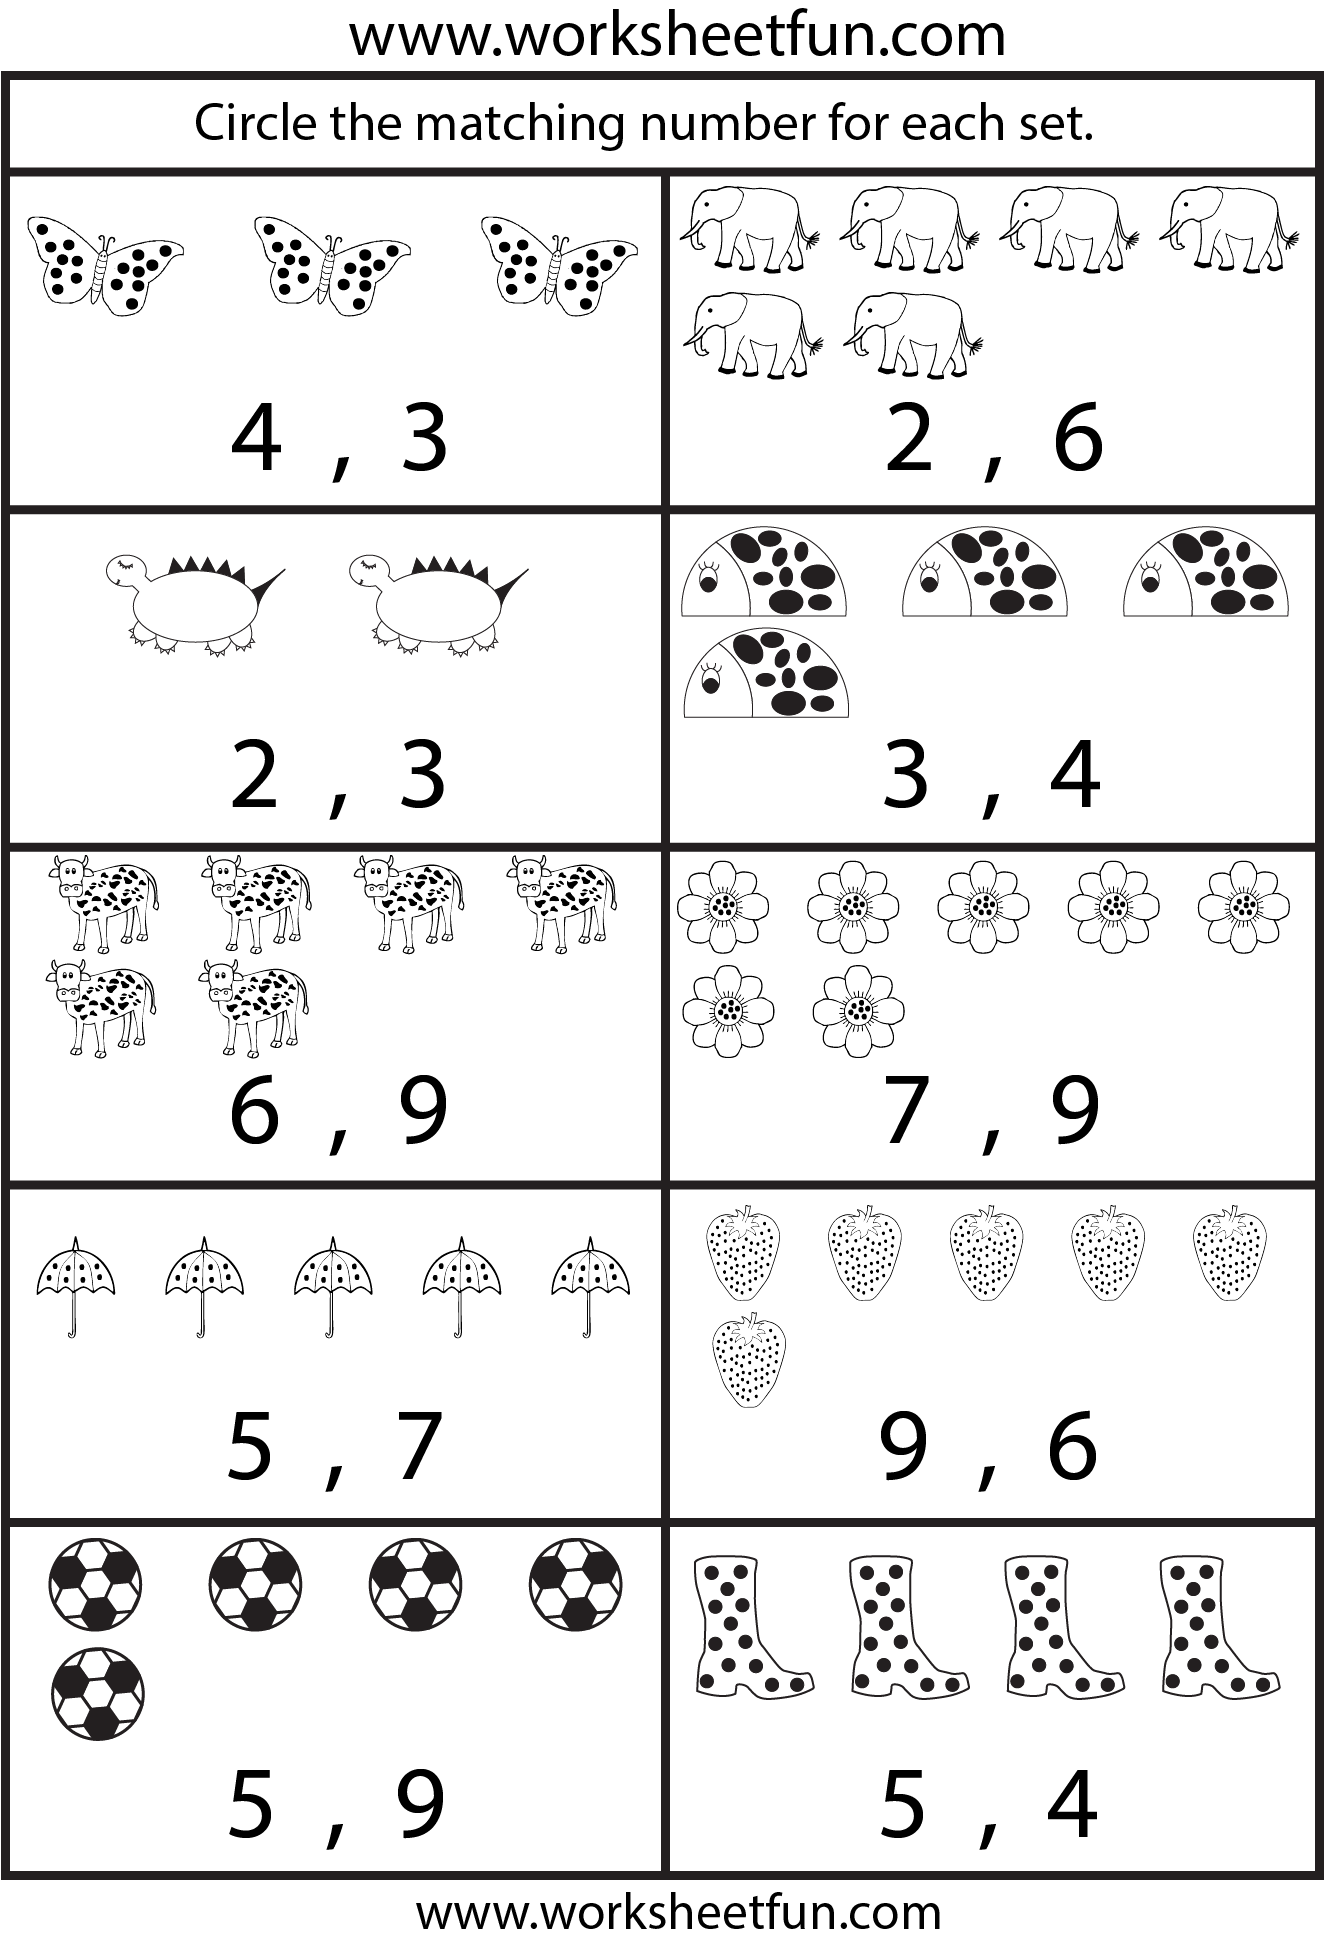 Counting Worksheets 1 10 Counting Worksheets 1 10 With An Apple Theme This Post Contains